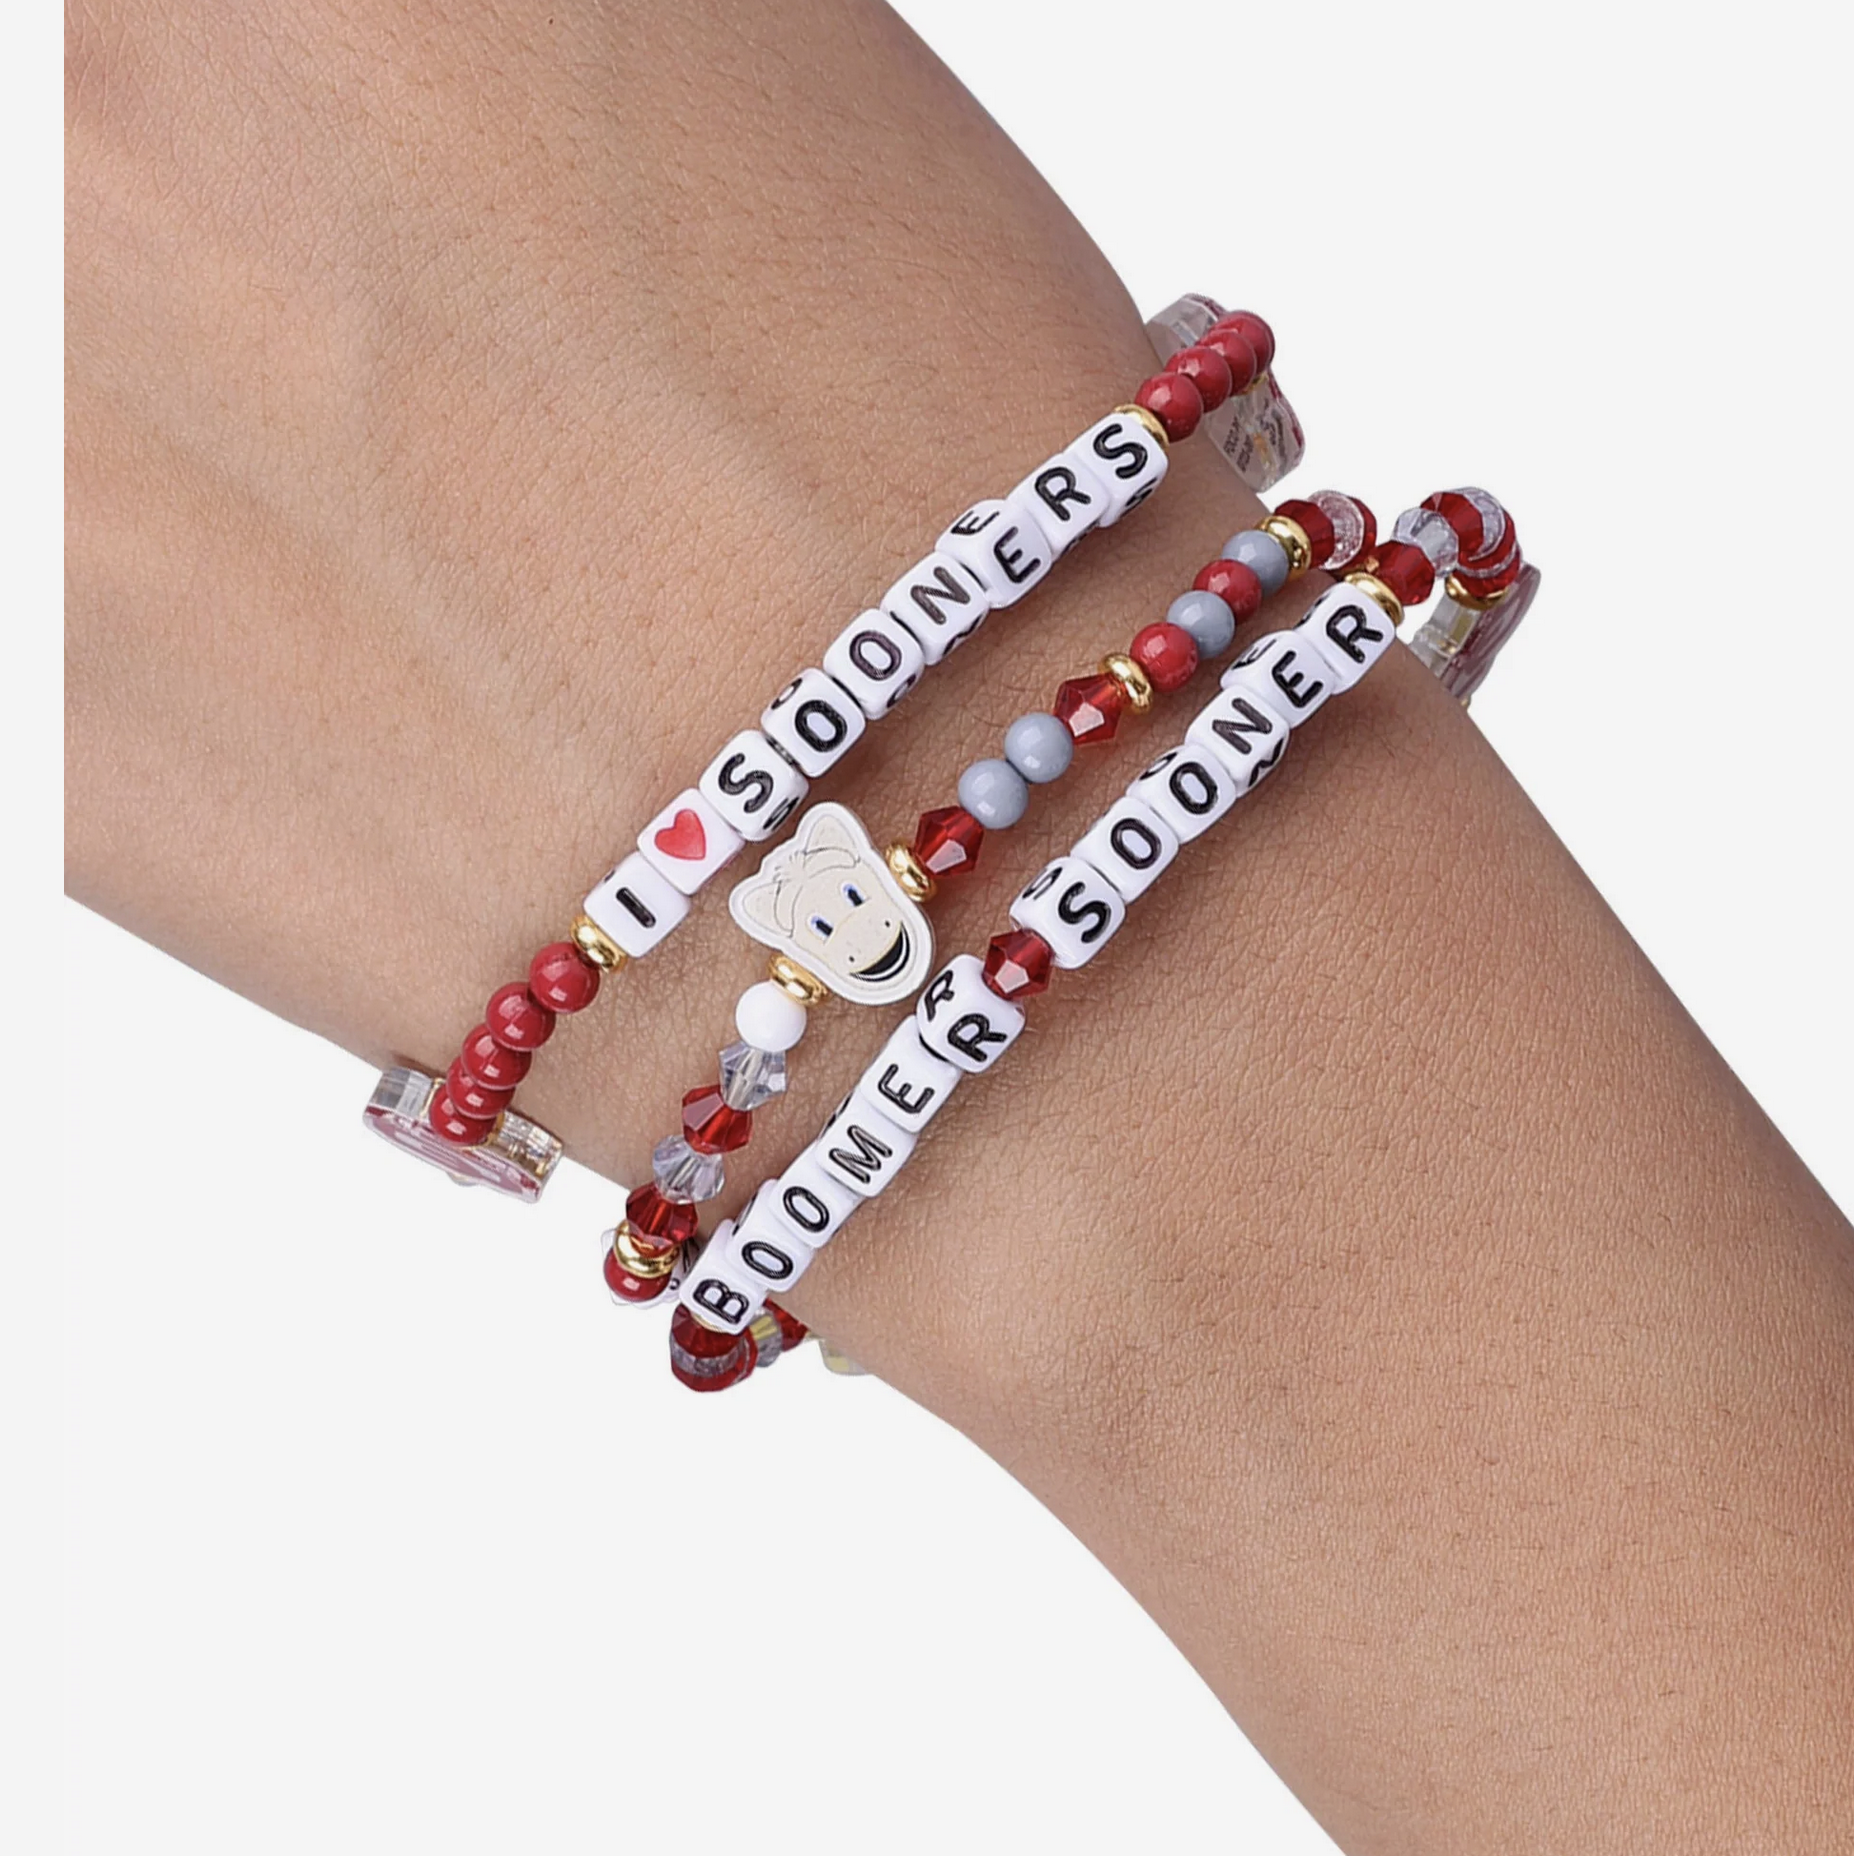 White Football Beads - Balfour of Norman